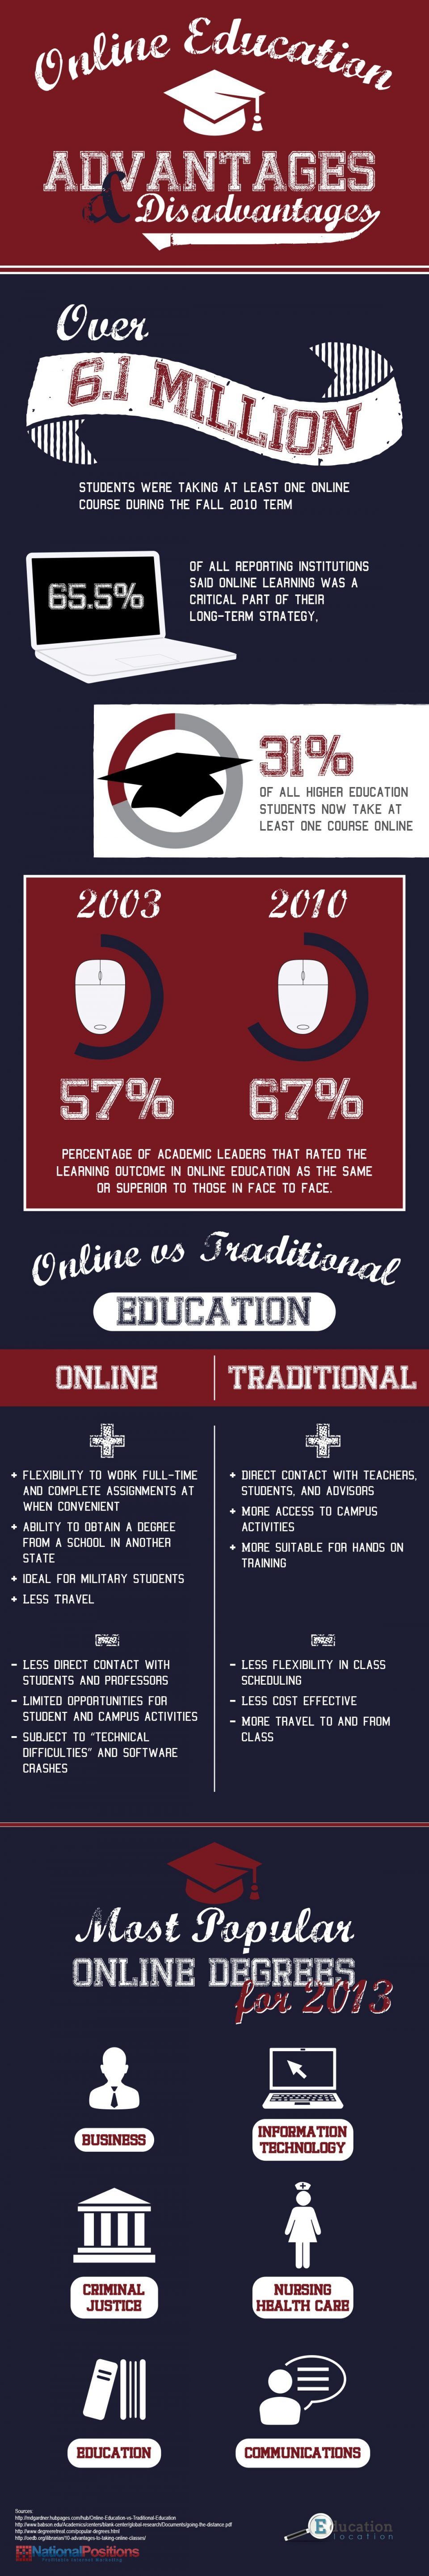 advantages-and-disadvantages-of-online-education-infographic-e-learning-infographics